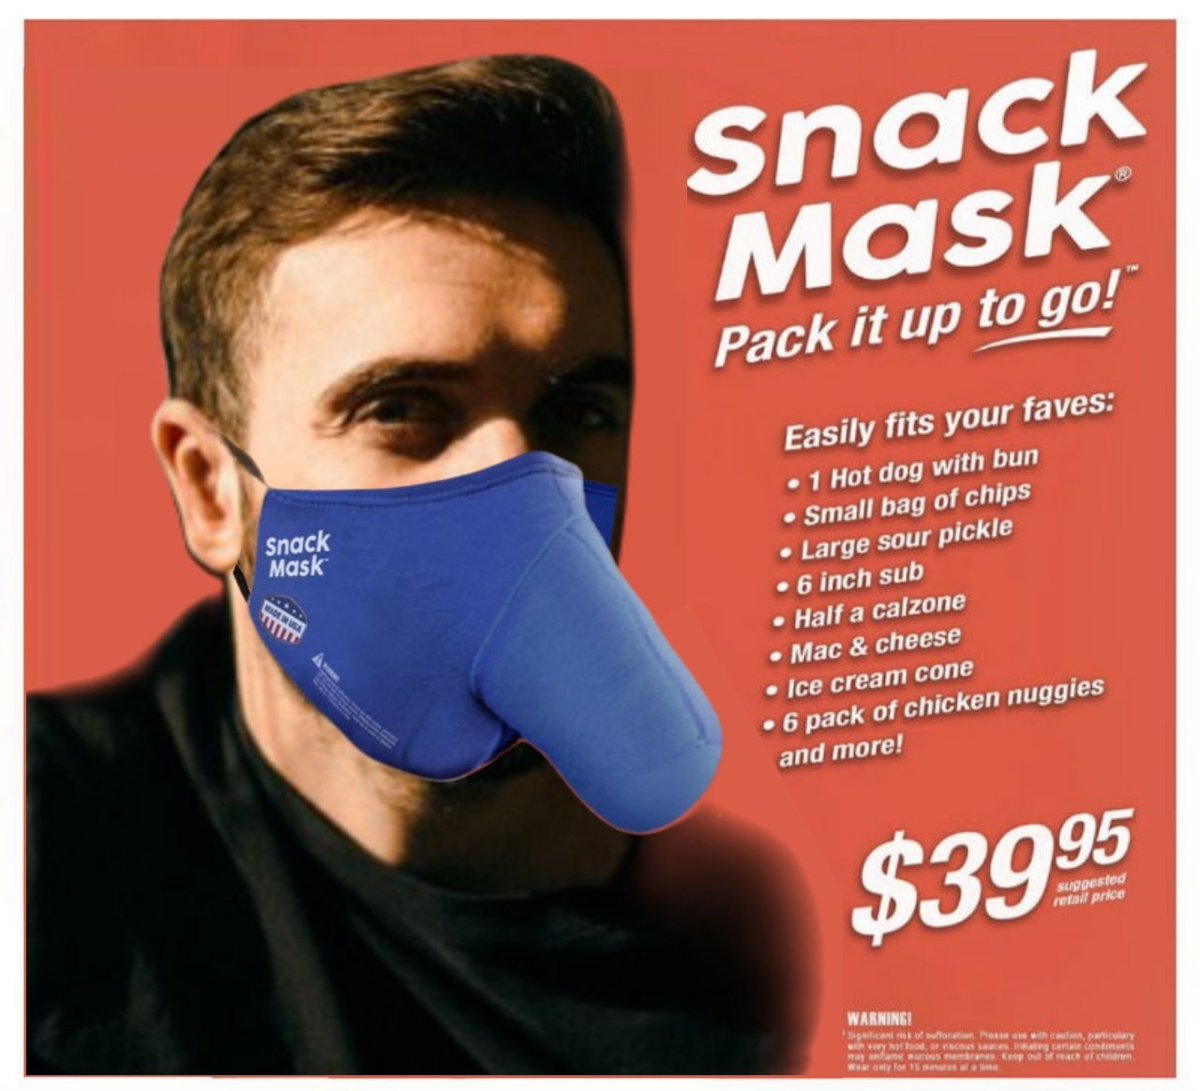 Fanny Pack out, Snack Mask in. Great for #AMCPopcorn. 
#AMCNOTLEAVING 🍿
$AMC $APE 😷